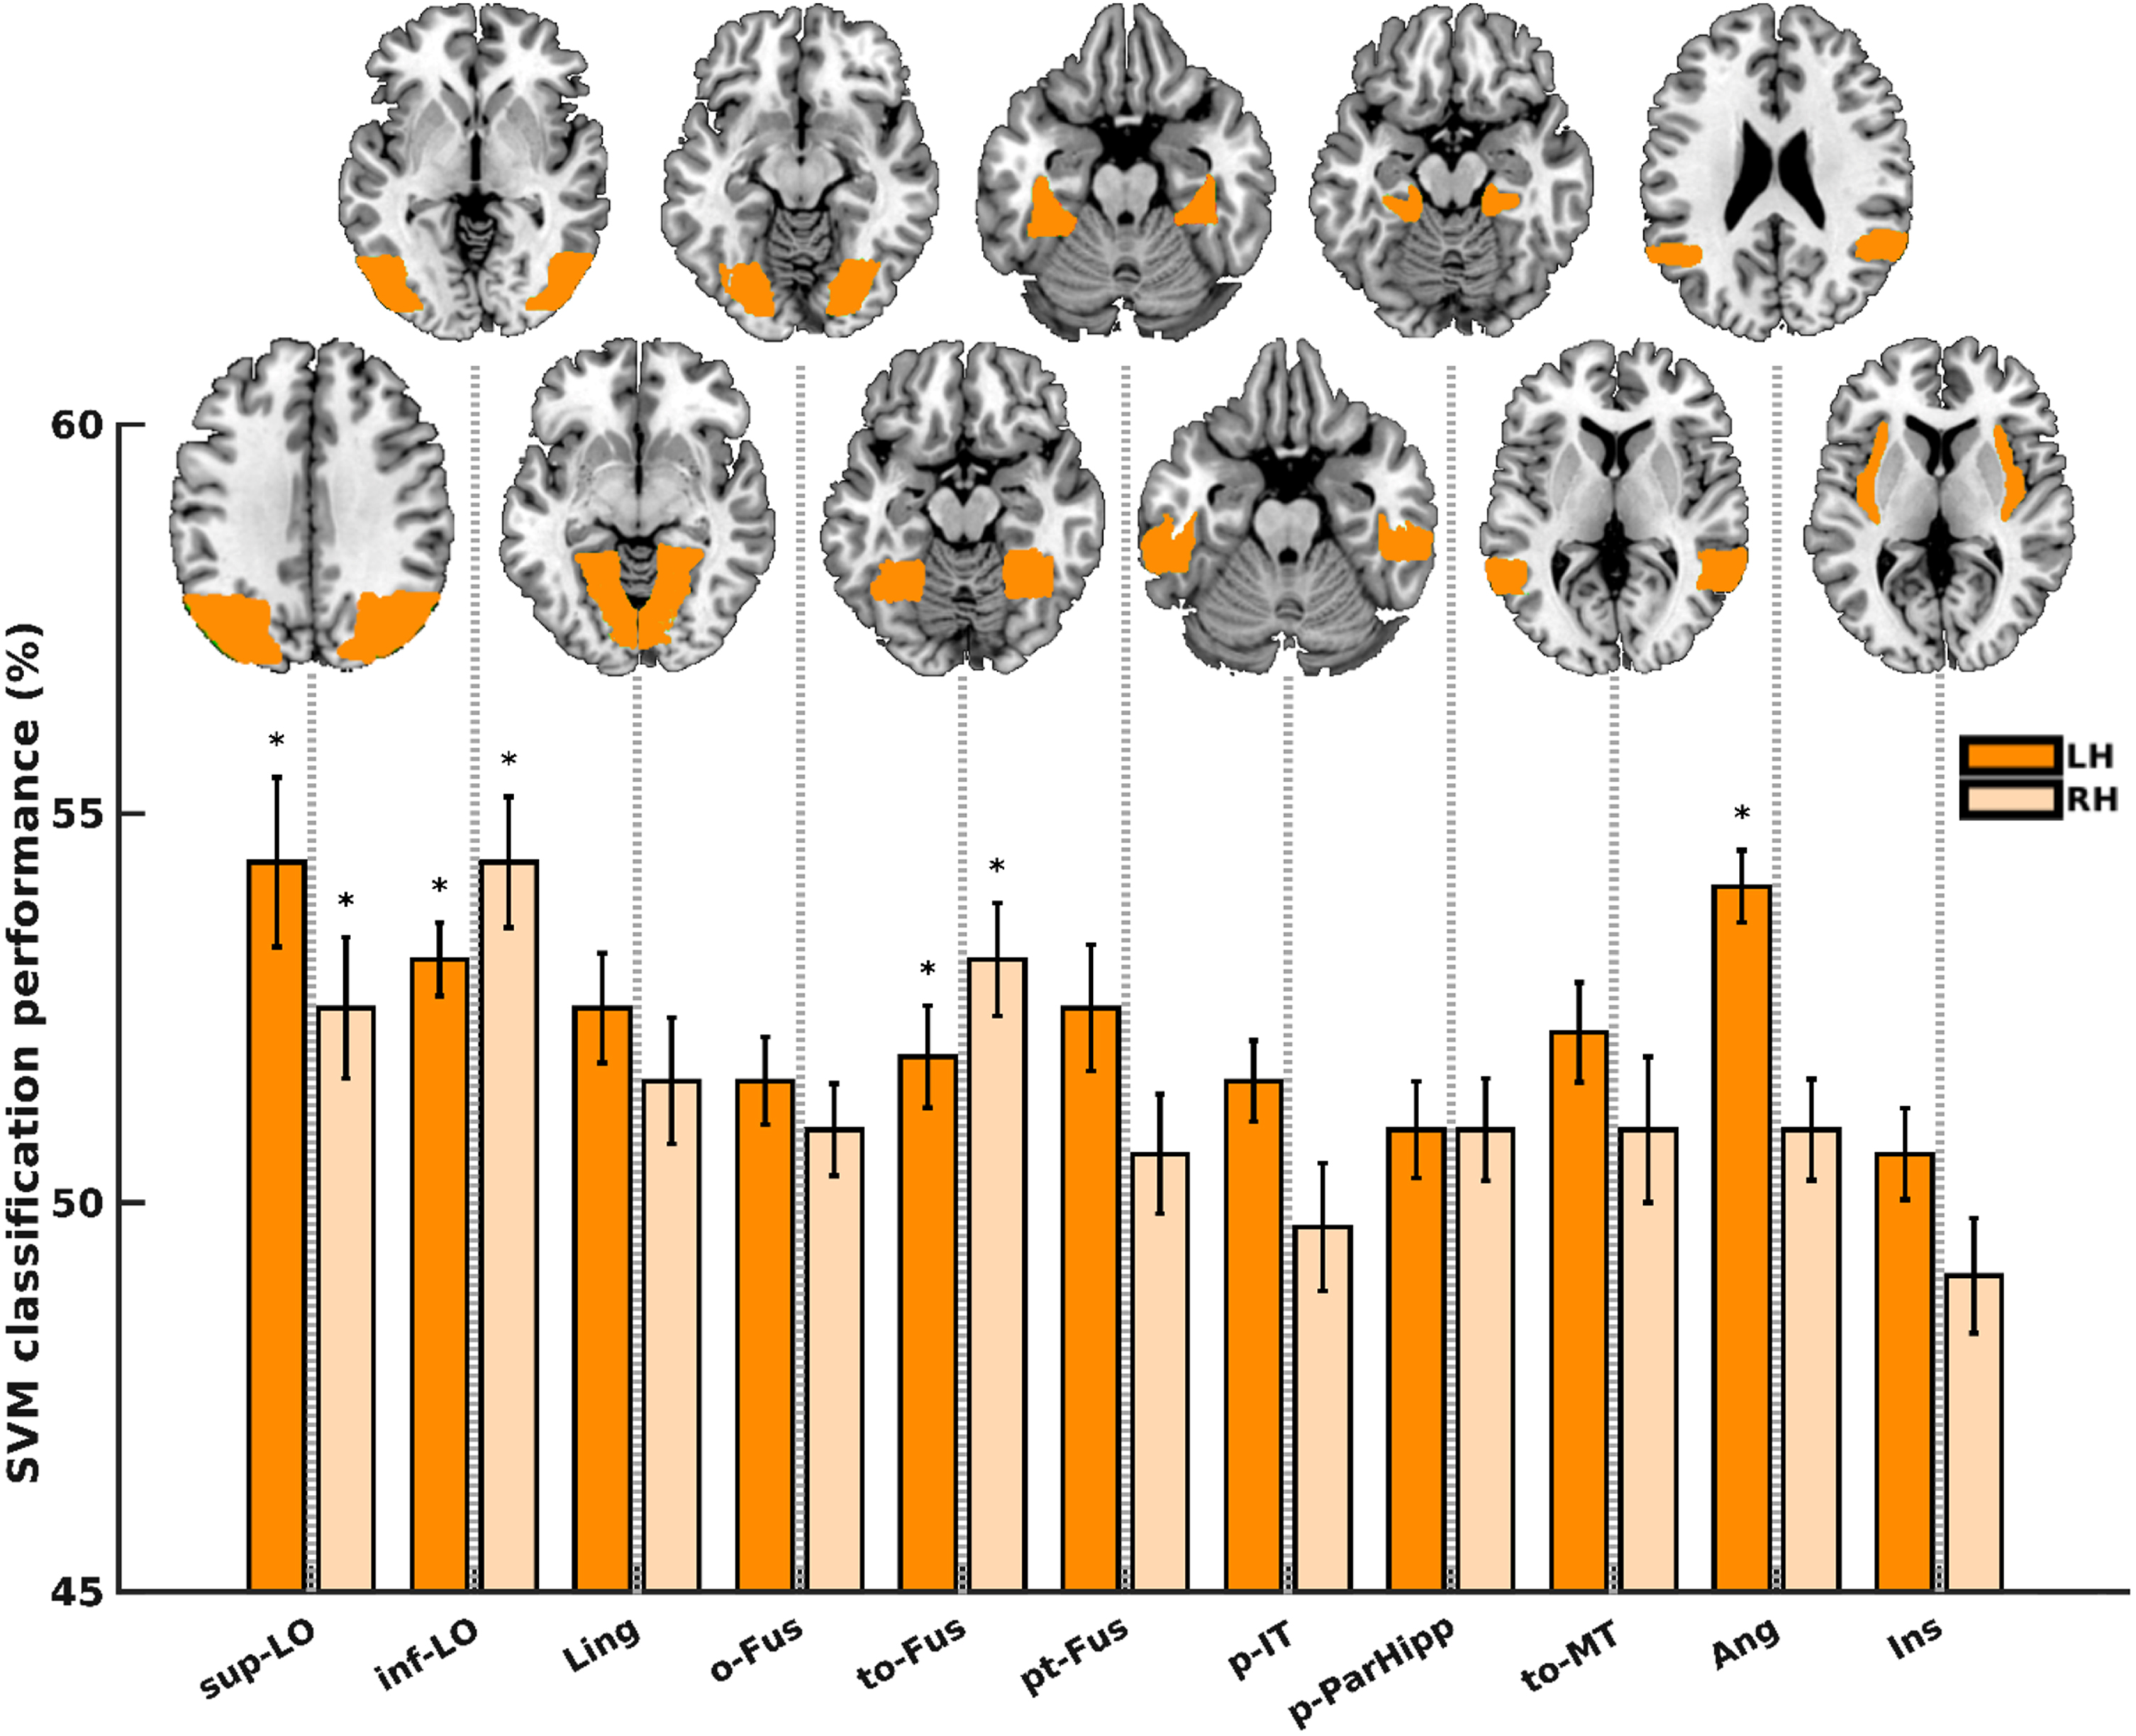 Animacy decoding in the MCI group. Dark and light orange bars represent the left and right hemispheres, respectively. Bars marked with asterisk (*) are regions remained significant following FDR correction. sup-LO, lateral occipital cortex, superior division; inf-LO, lateral occipital cortex, inferior division; Ling, lingual gyrus; o-Fus, occipital fusiform gyrus; to-Fus, temporal occipital fusiform cortex; pt-Fus, temporal fusiform cortex, posterior division; p-IT, inferior temporal gyrus, posterior division; p-ParaHipp, parahippocampal gyrus, posterior division; to-MT, middle temporal gyrus, temporooccipital part; Ang, angular gyrus; Ins, insular cortex.